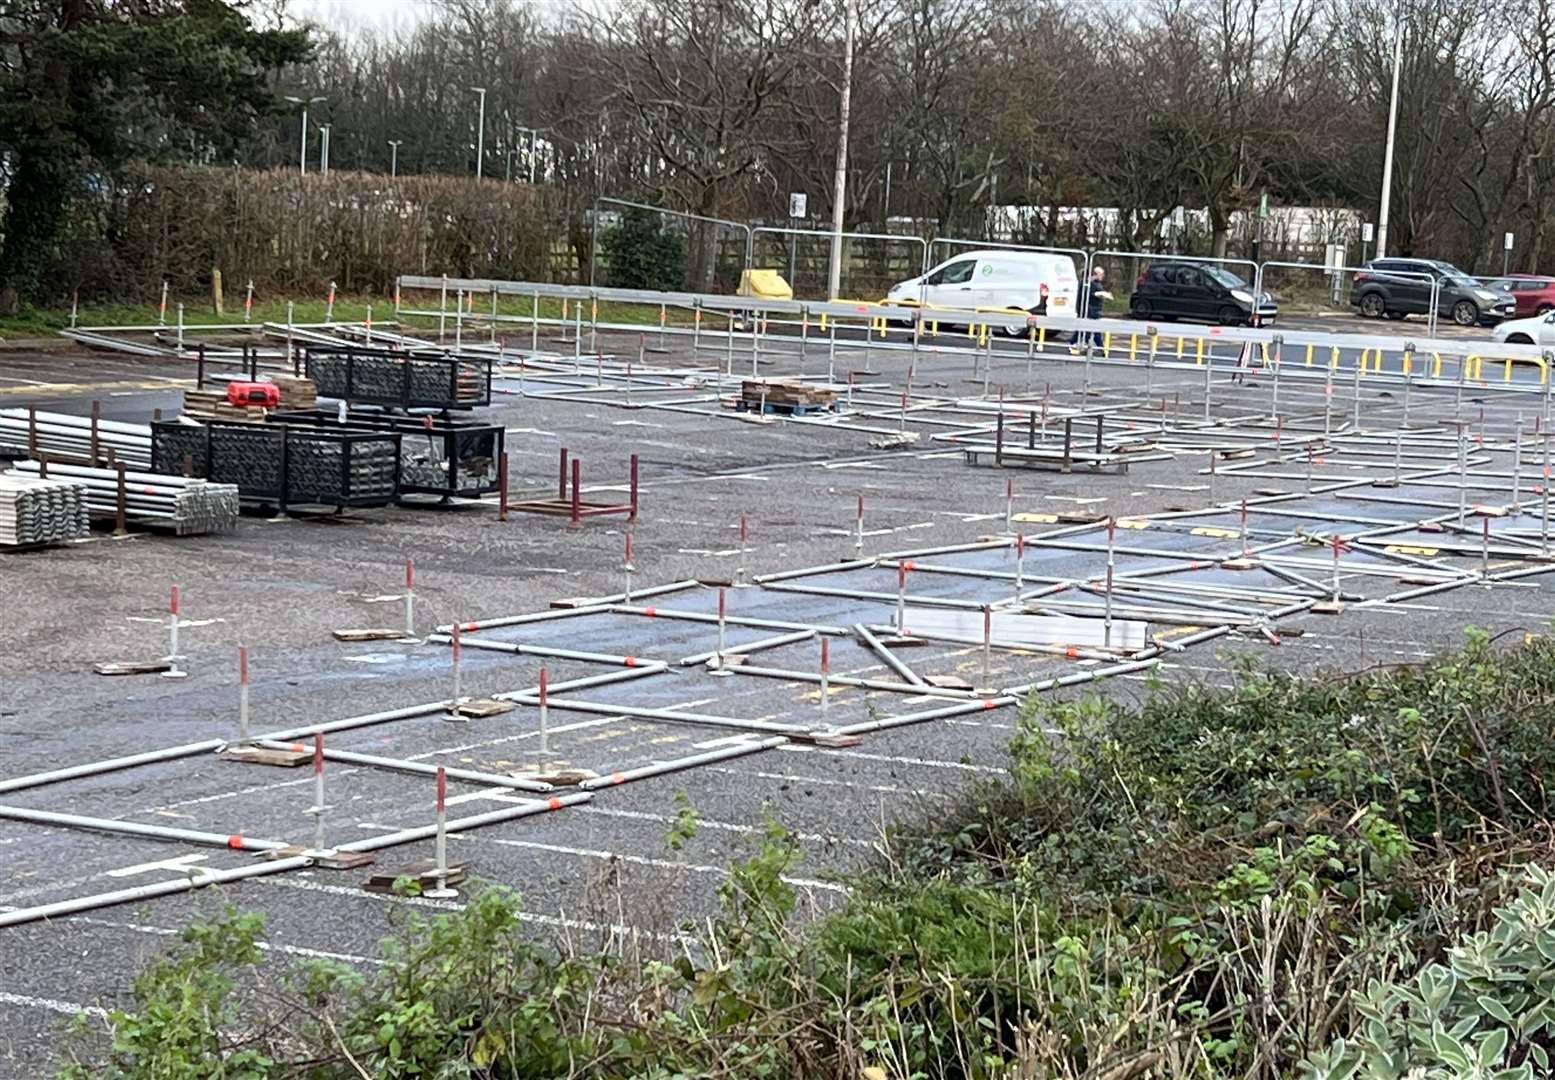 The hospital's main car park is being used